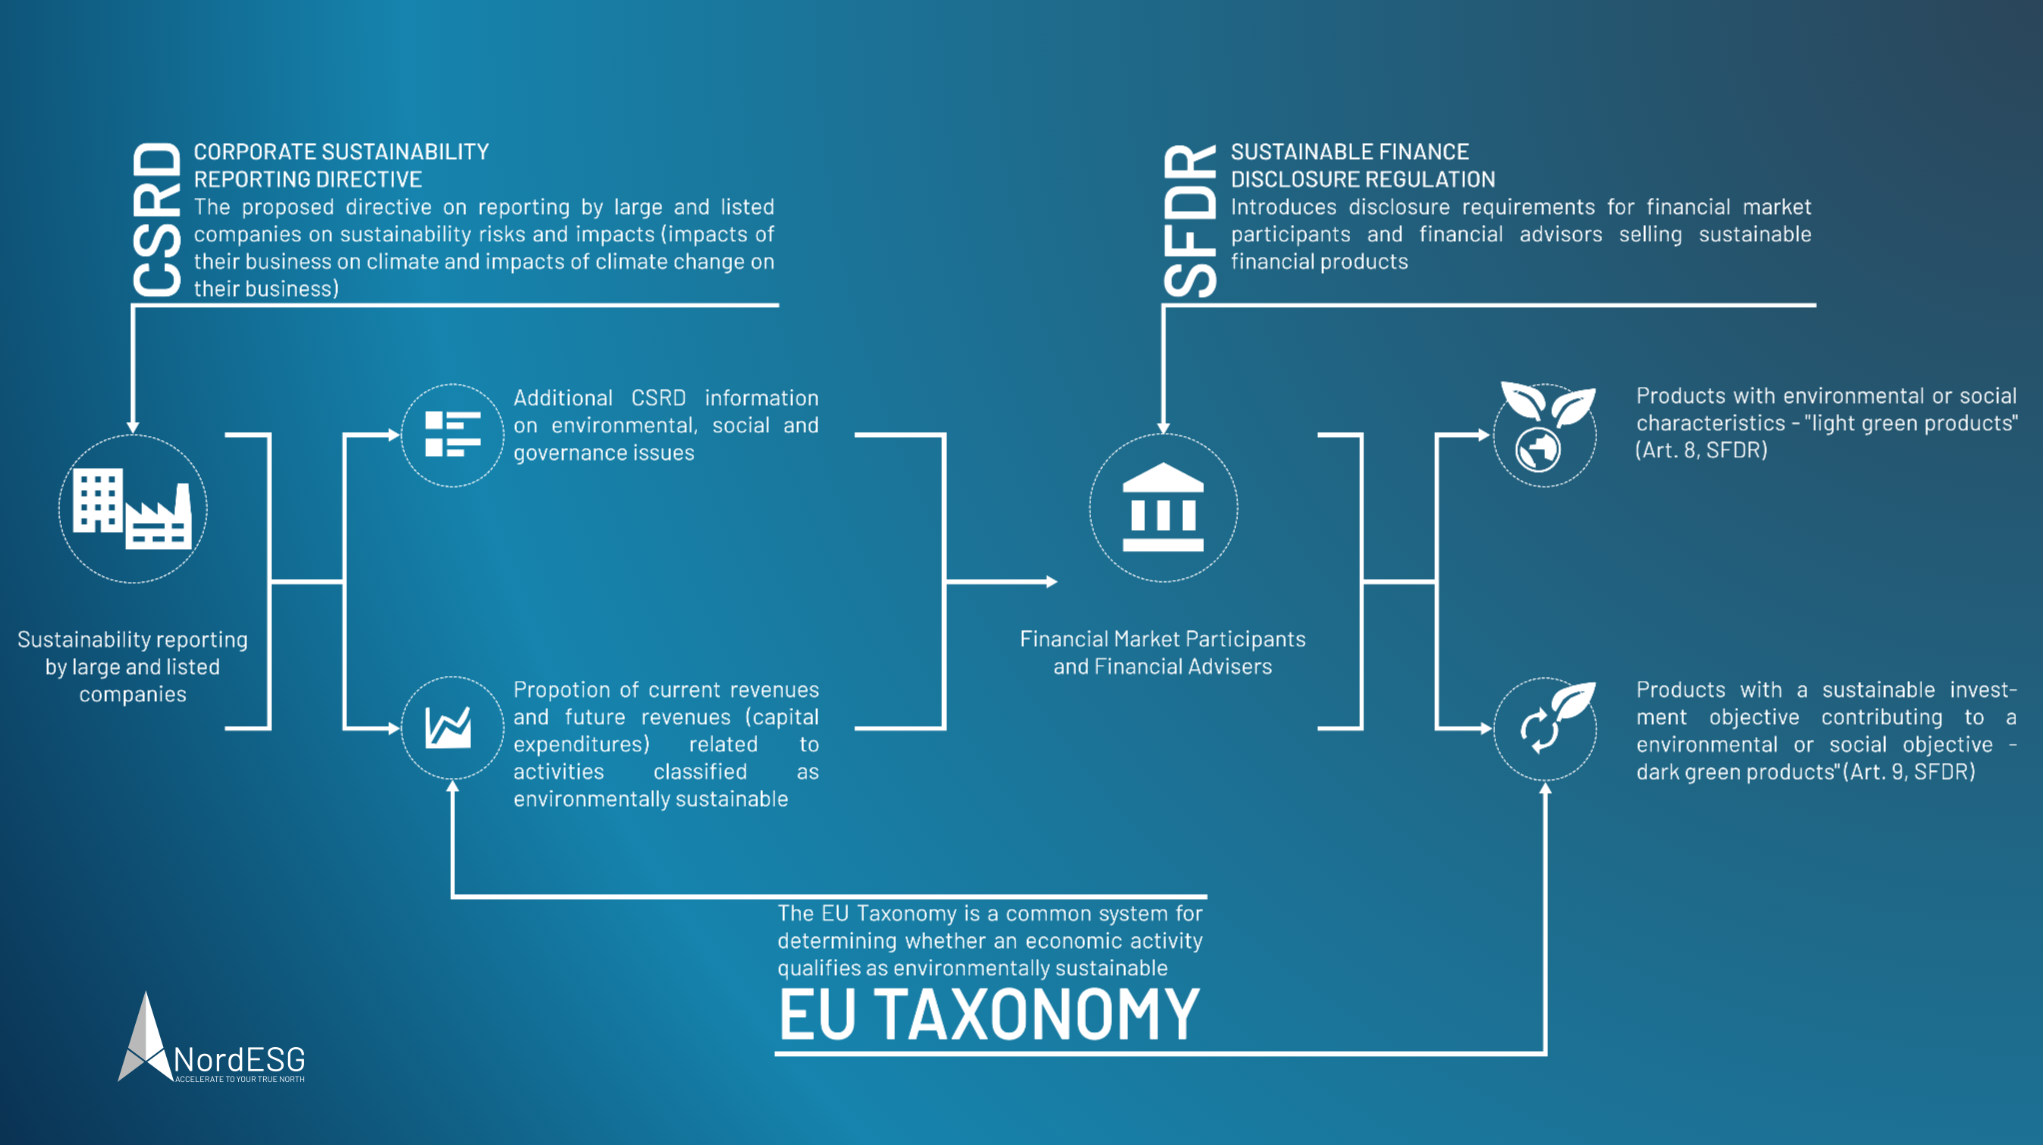 the difference between the Corporate Sustainability Reporting Directive (CSRD) and the EU Taxonomy